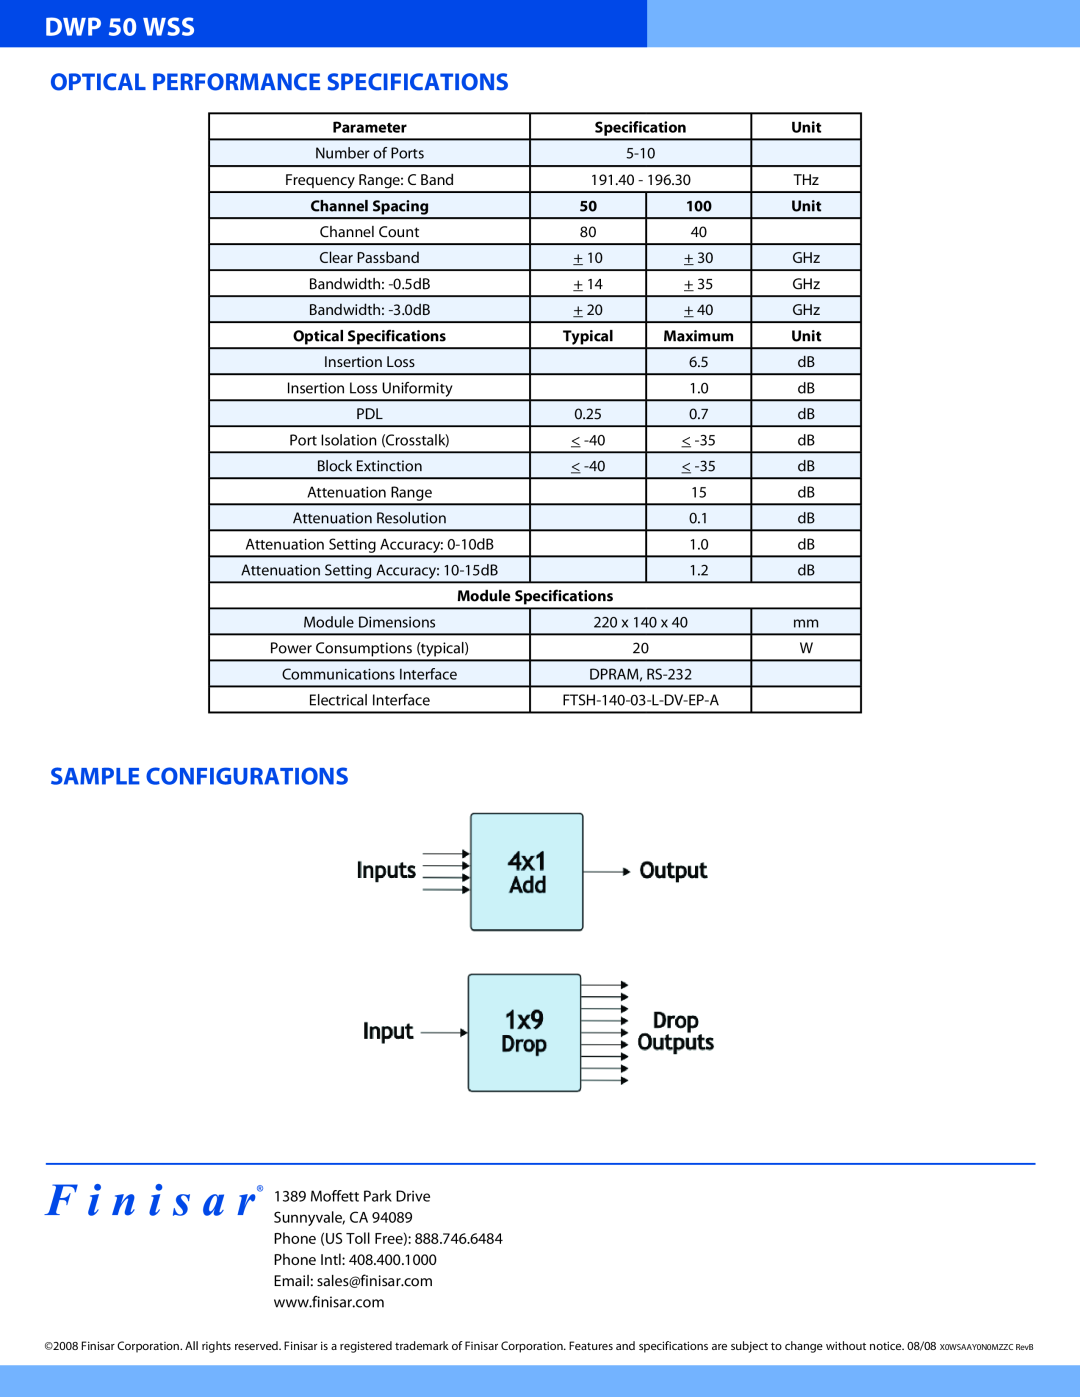 Finisar manual DWP 50 WSS, Optical Performance Specifications, Sample Configurations, Parameter, Unit, Typical, Maximum 